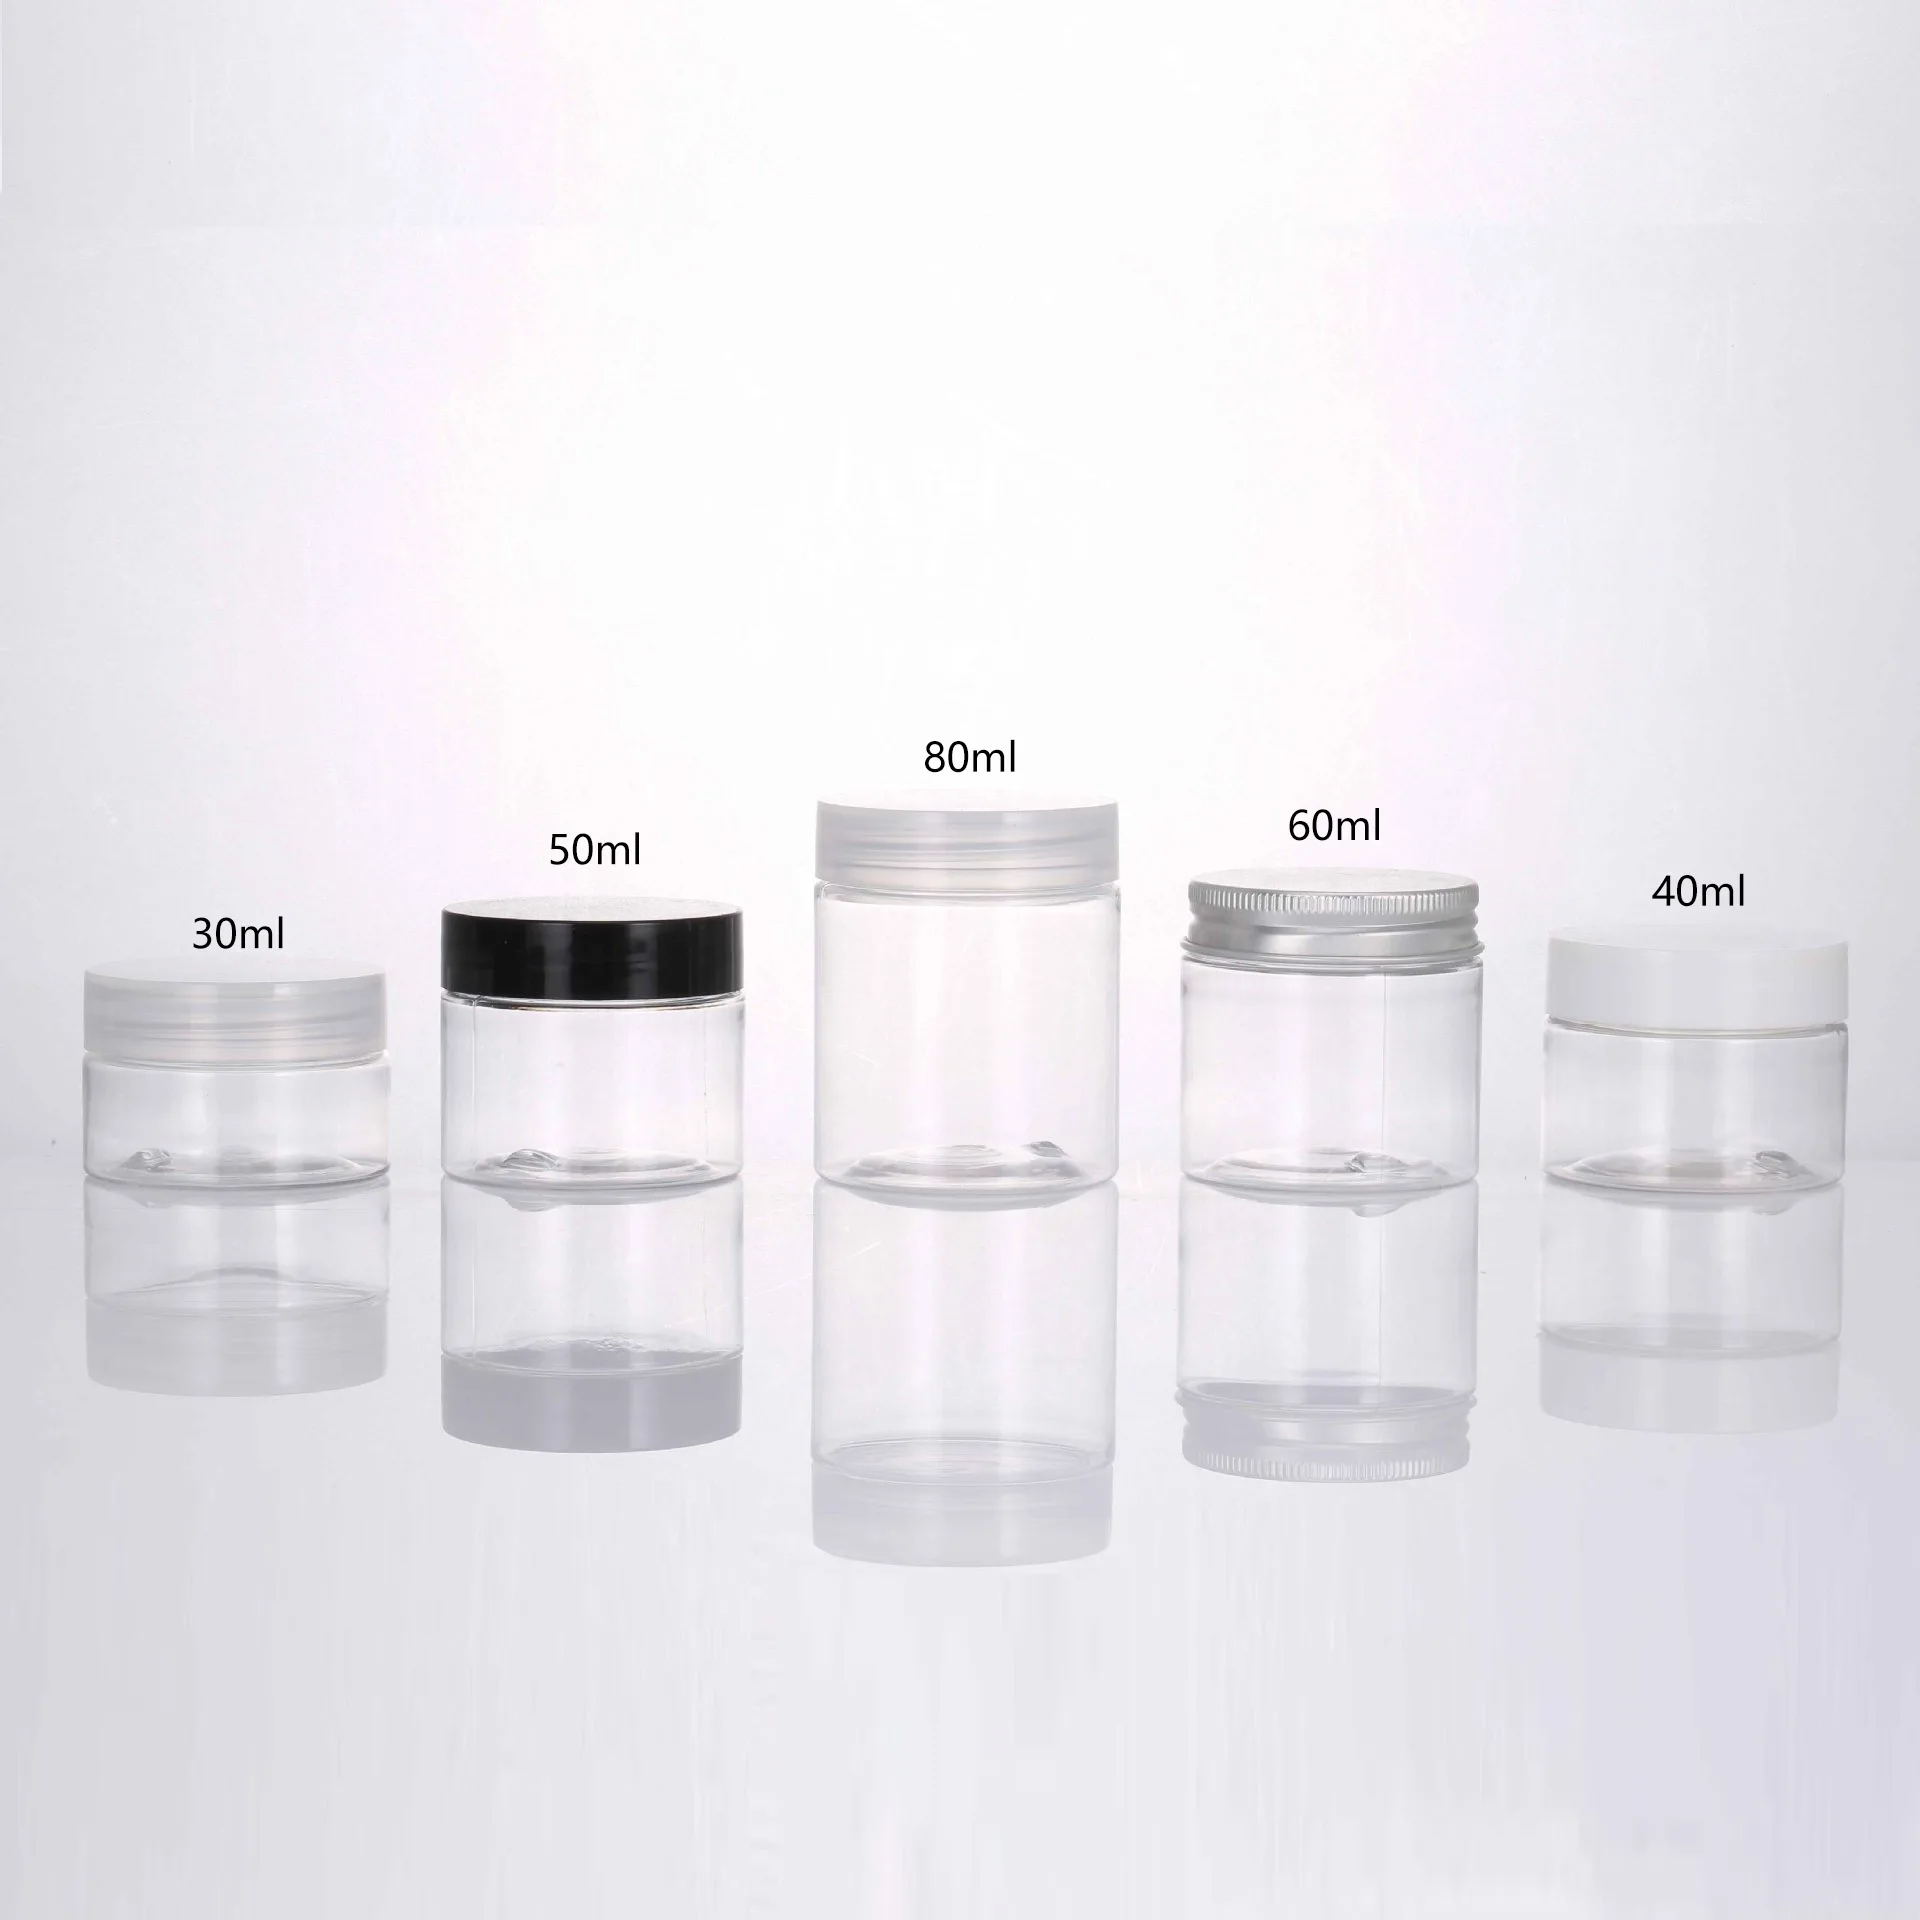 

Hot selling 30ml 60ml 80ml cosmetic packaging plastic face cream jars with white black or transparent lids